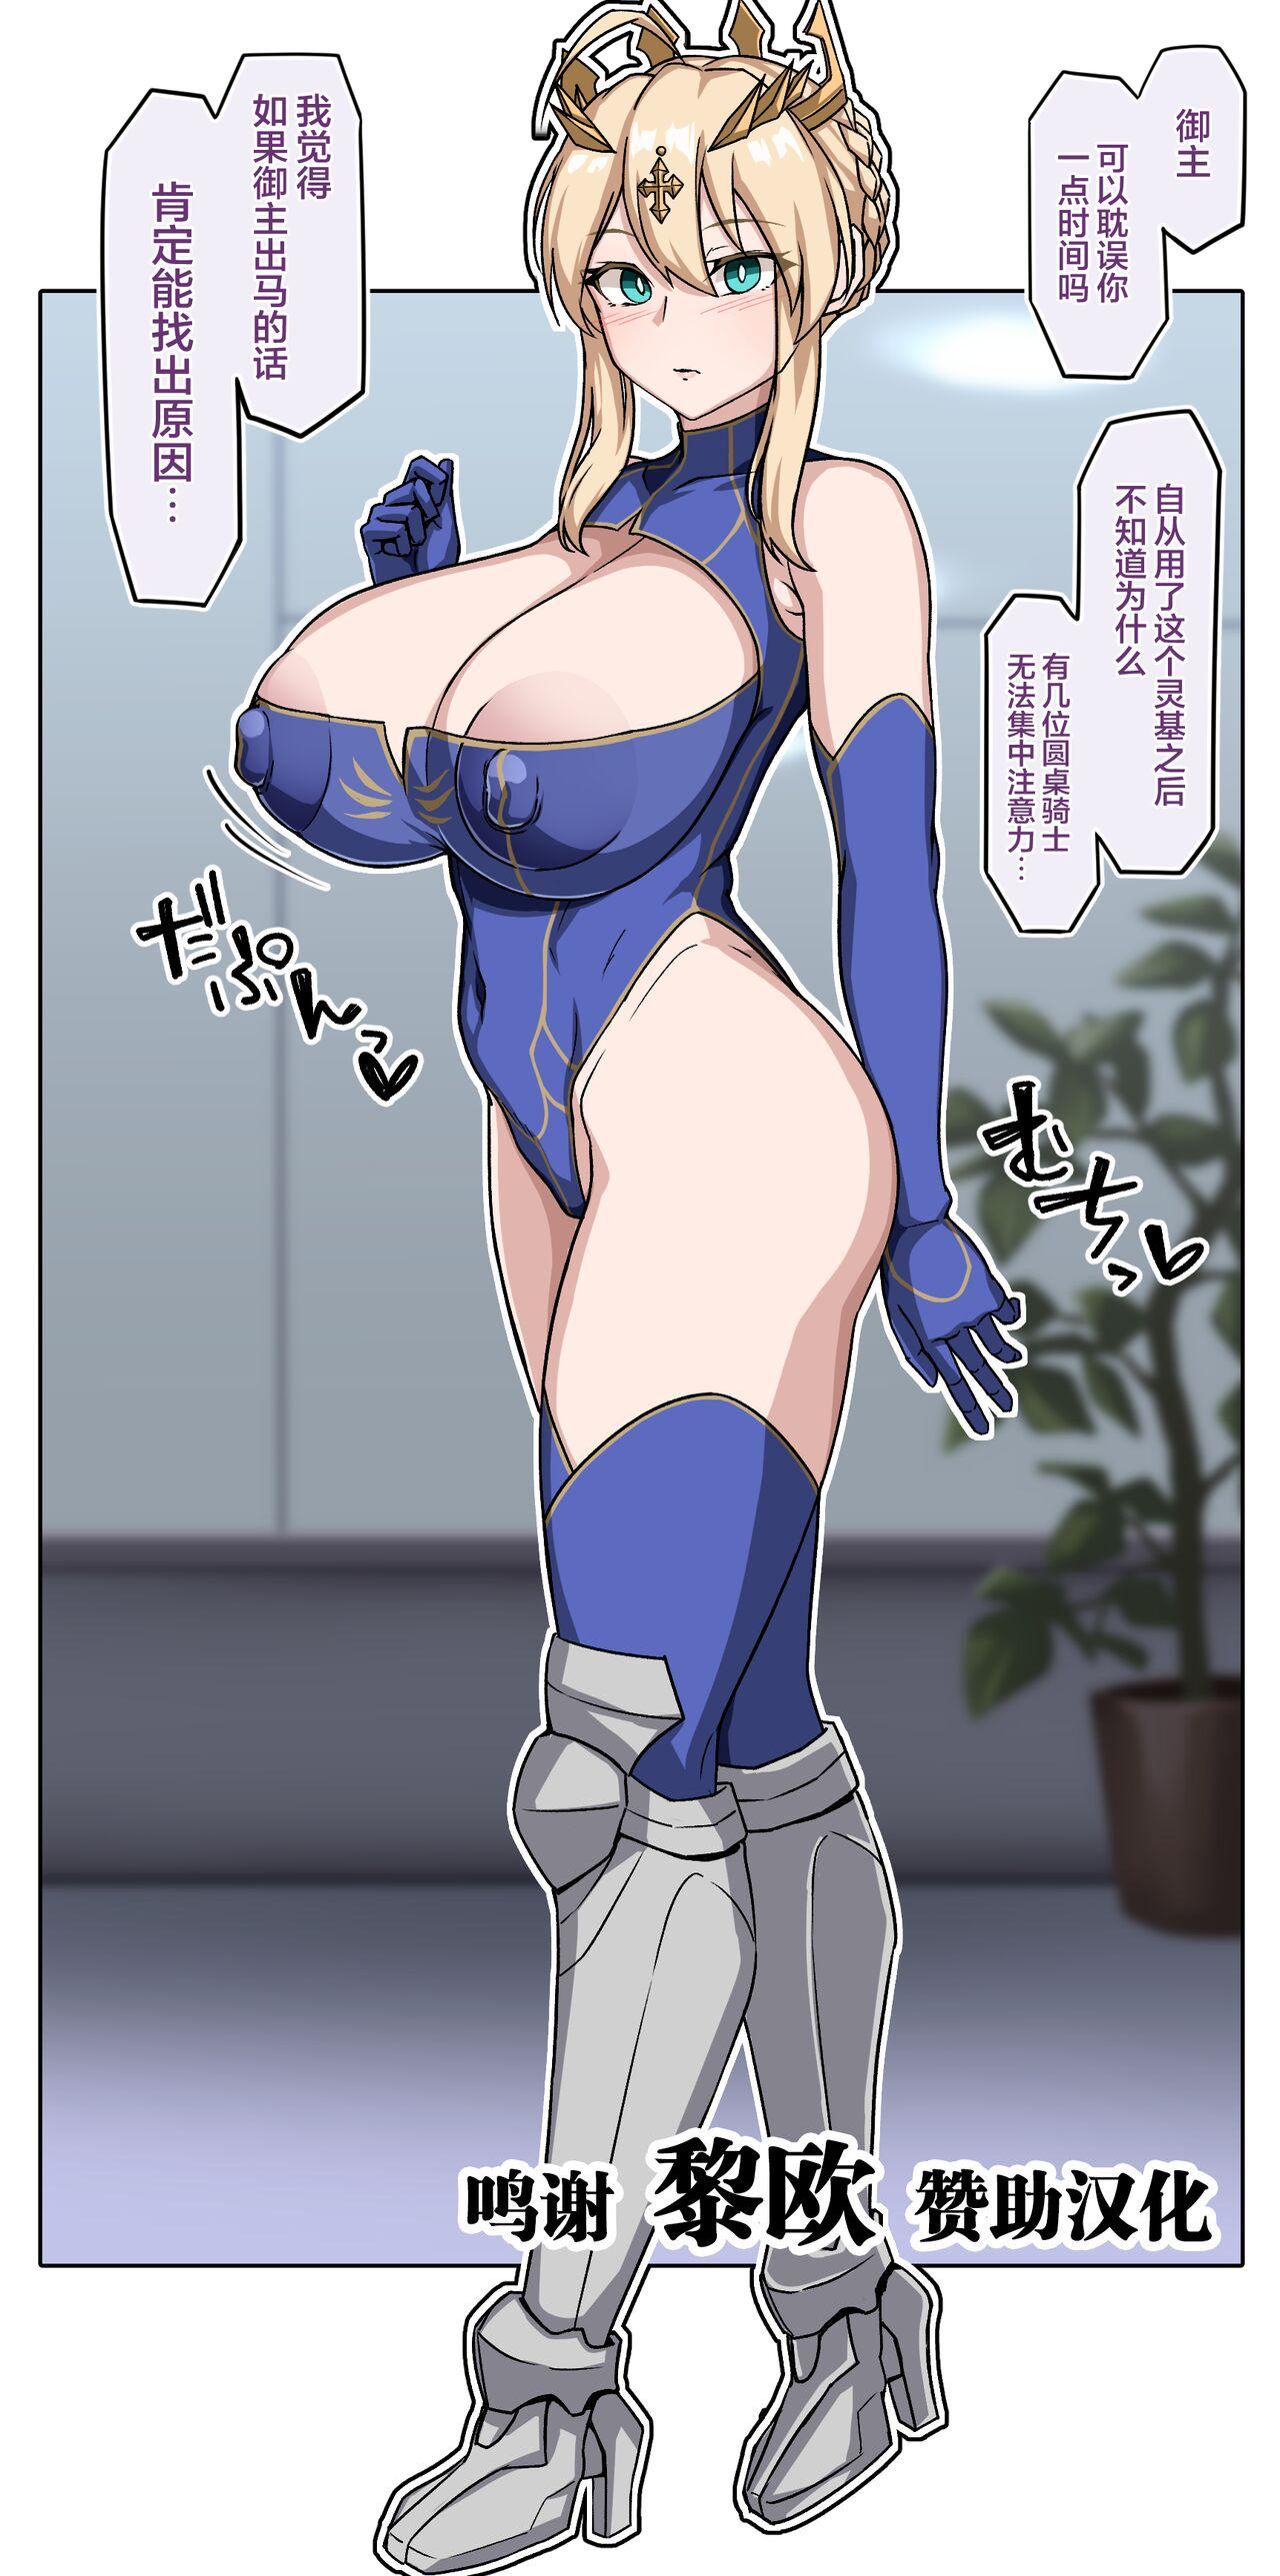 Wank 乳上 - Fate grand order Homosexual - Picture 1